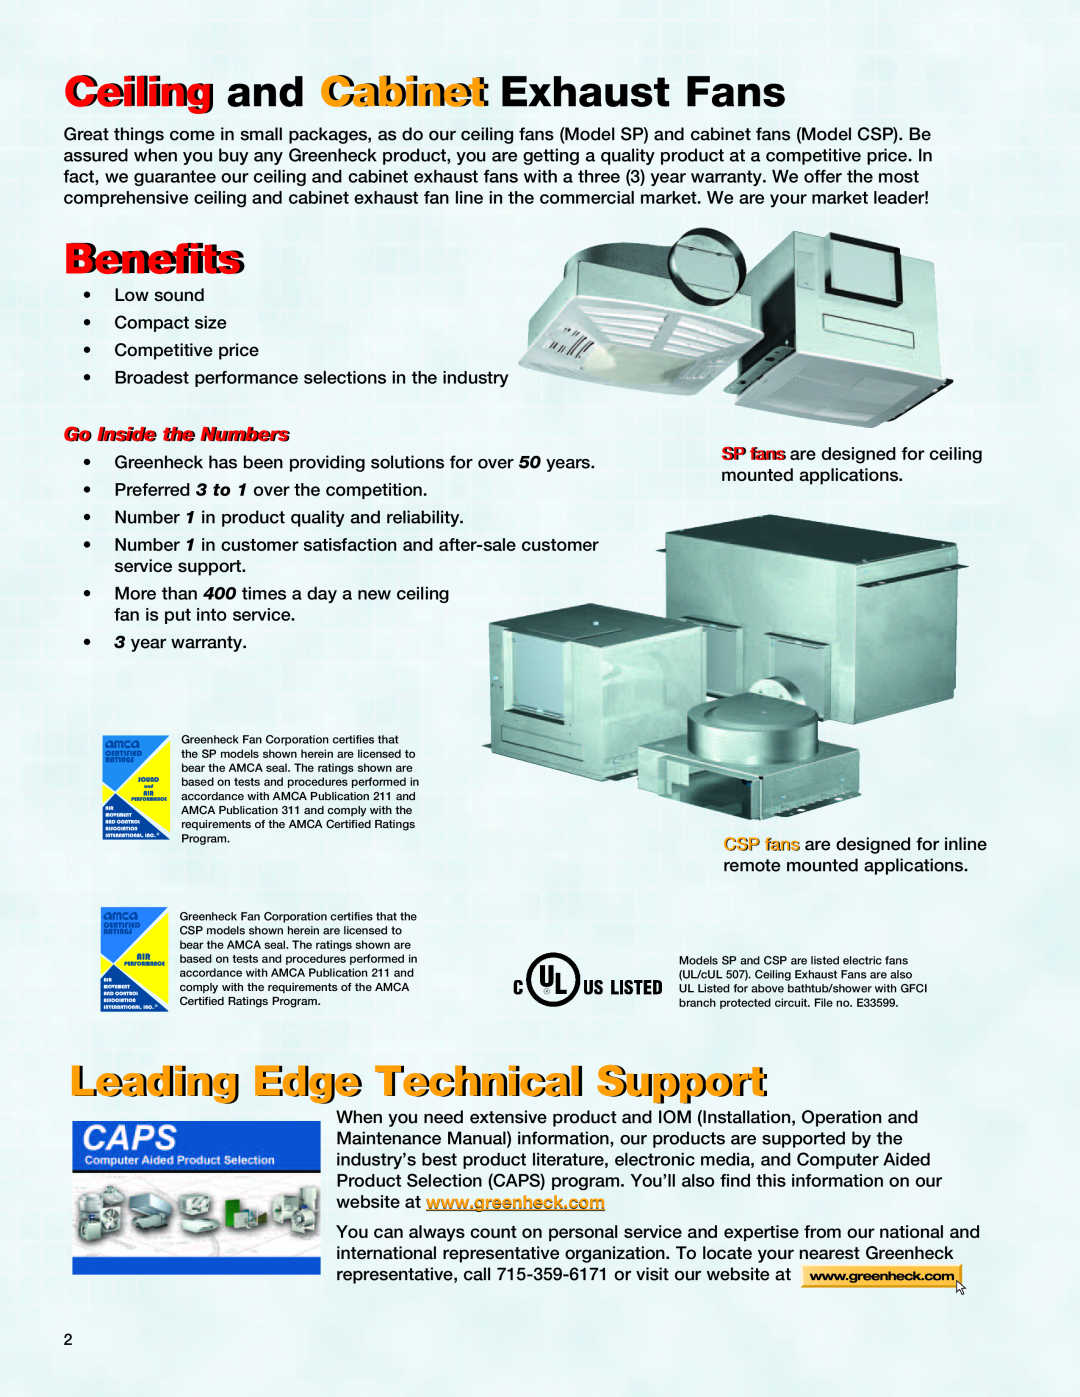 Greenheck Fan CSP Benefitsi, Leading Edge Technical Support, Go Insidei the Numbers, Ceiling and Cabinet Exhaust Fans 